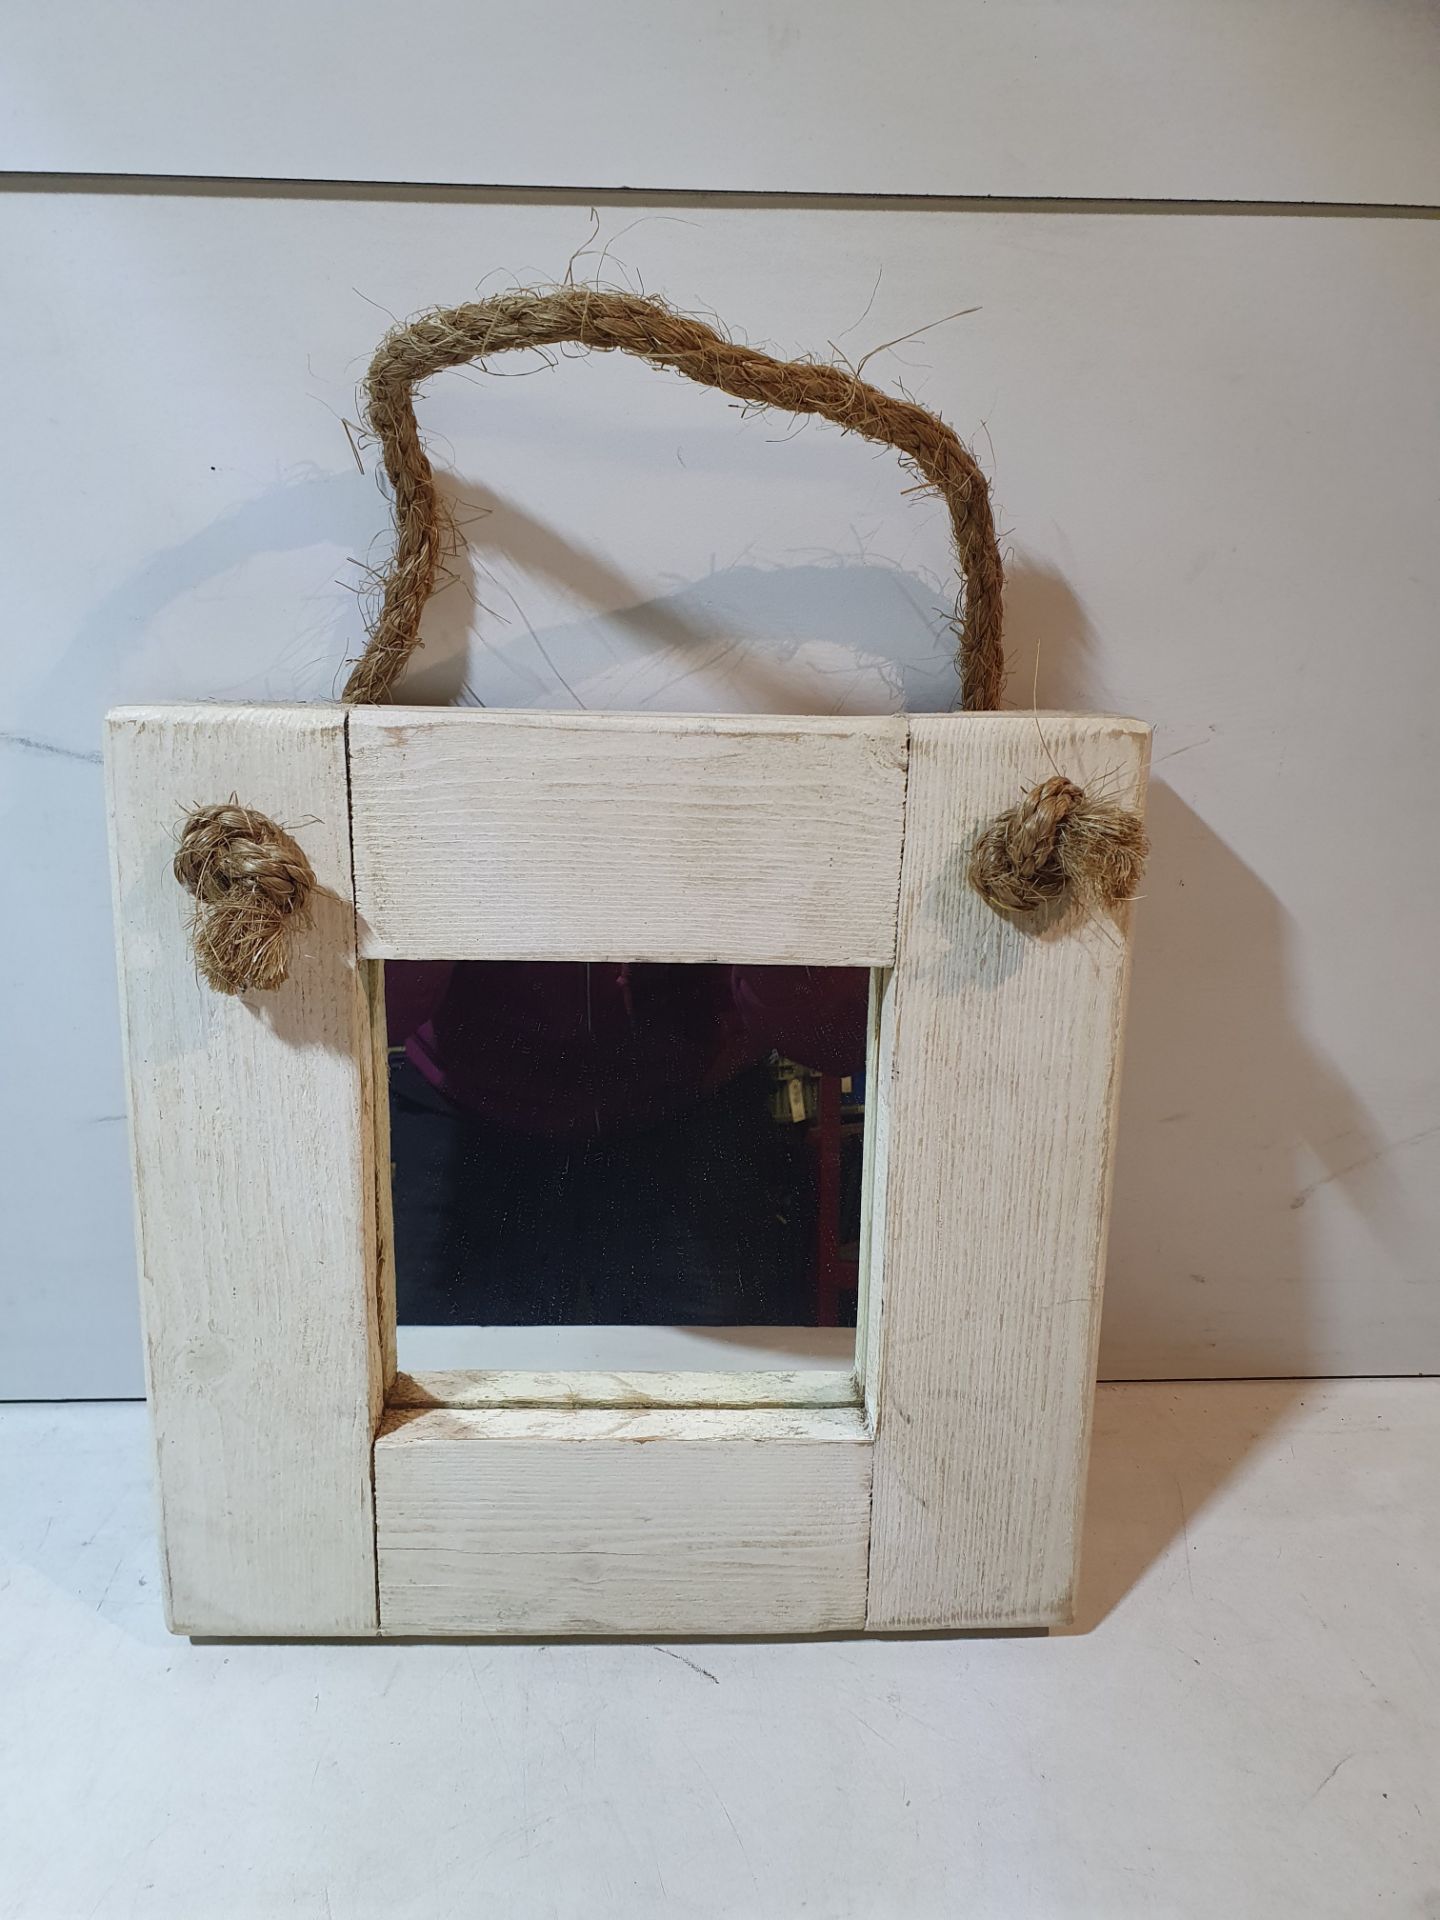 2 x Wooden Mirrors with Straw Hanging Straps - Image 4 of 5